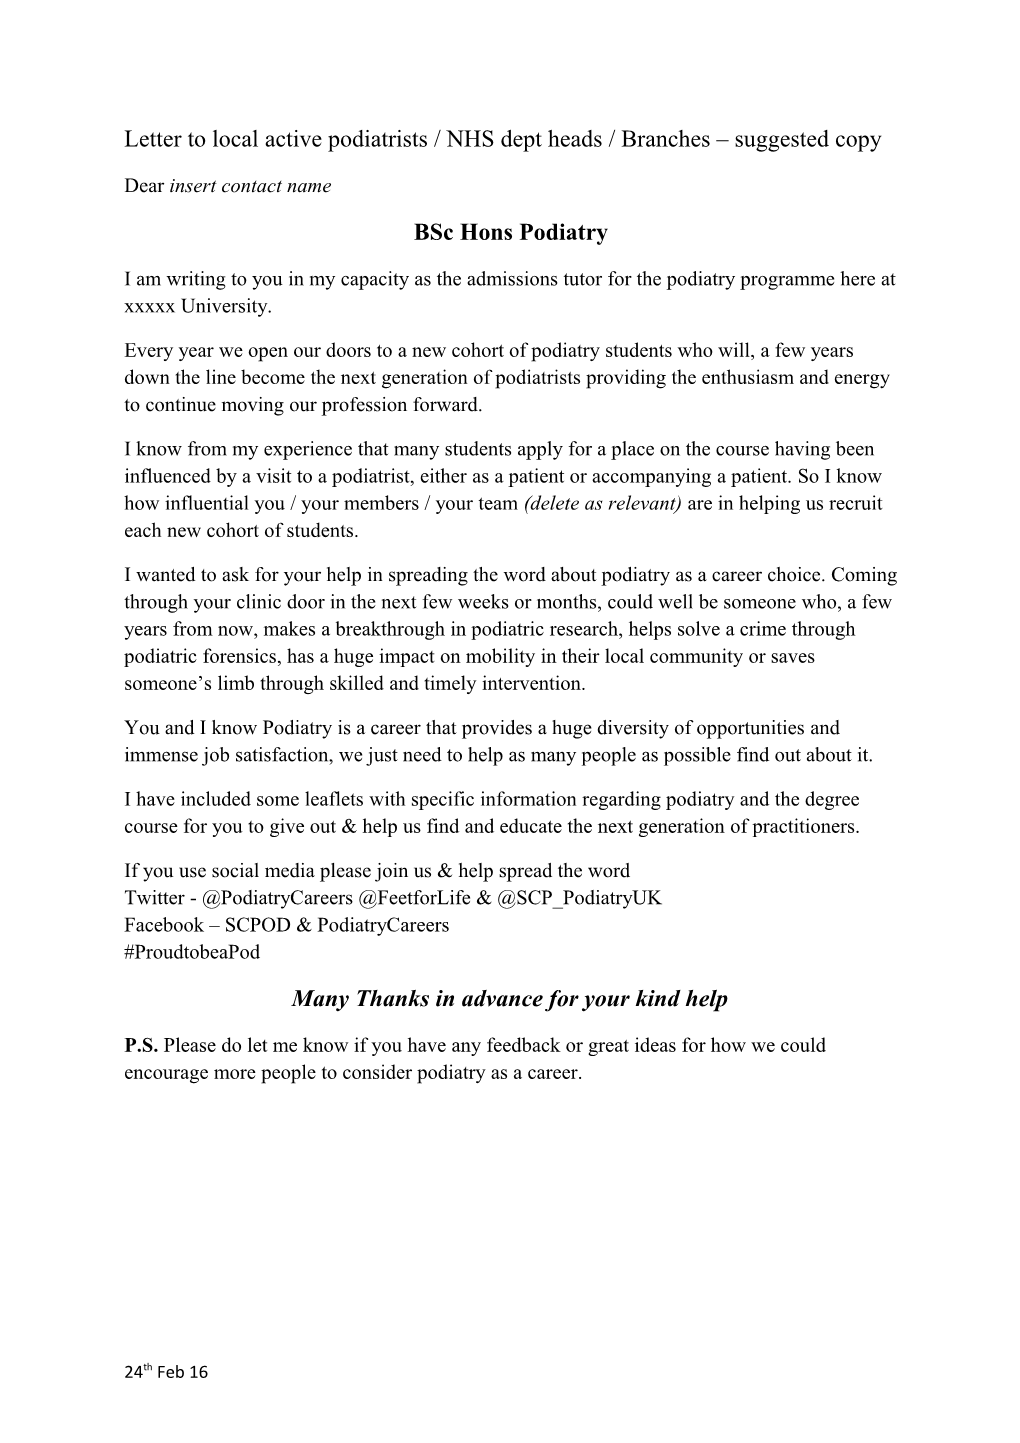 Letter to Local Active Podiatrists / NHS Dept Heads / Branches Suggested Copy